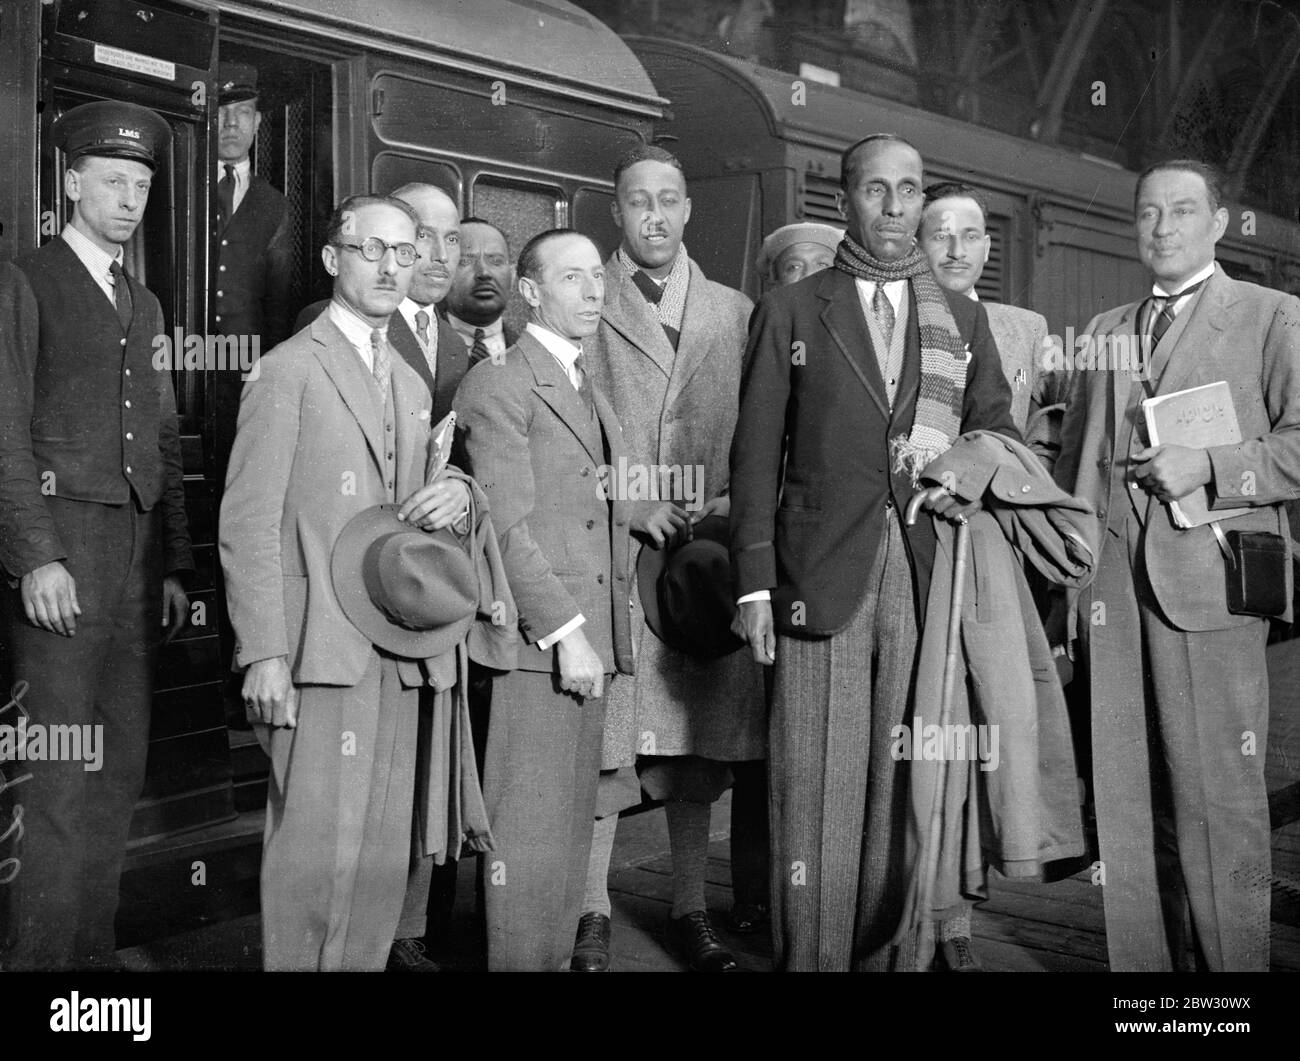 Moroccan Prince arrives in London . El Glaoui , the Passha of Marrakesh , in Morocco , who is known as Sultan of the Atlas , arrived in London to spend fifty days in England . El Glaoui is a keen golfer and has a golf course and professional of his own on his estates in Marrakesh . El Glaoui ( wearing scarf ) with members of his party on arrival at St Pancras sttaion , London . 4 August 1932 Stock Photo